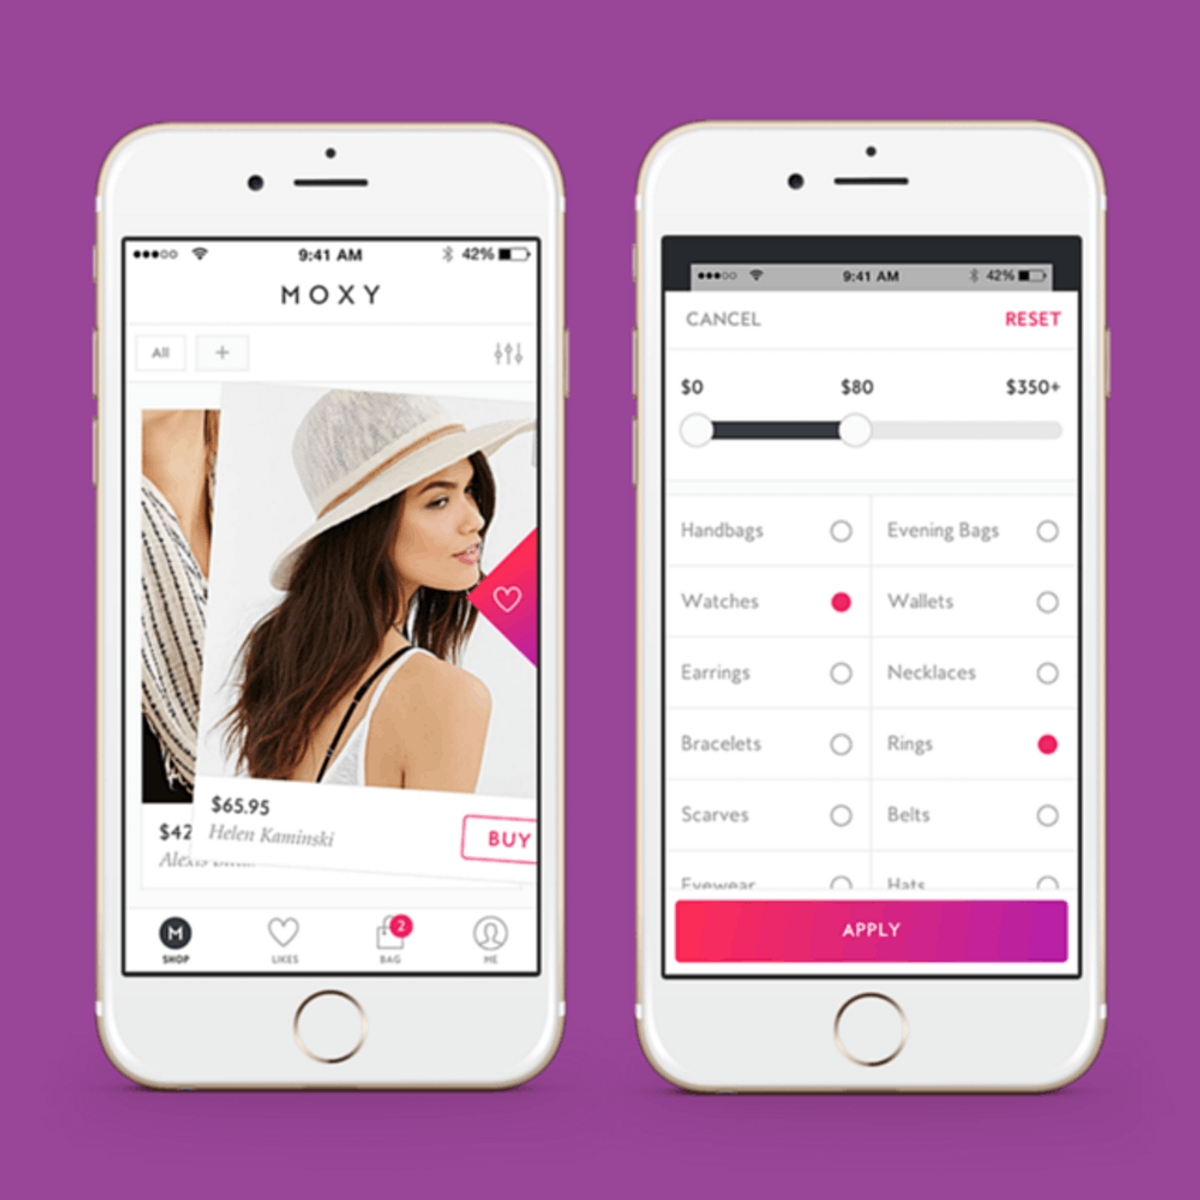 This App Is like Tinder for Your Closet